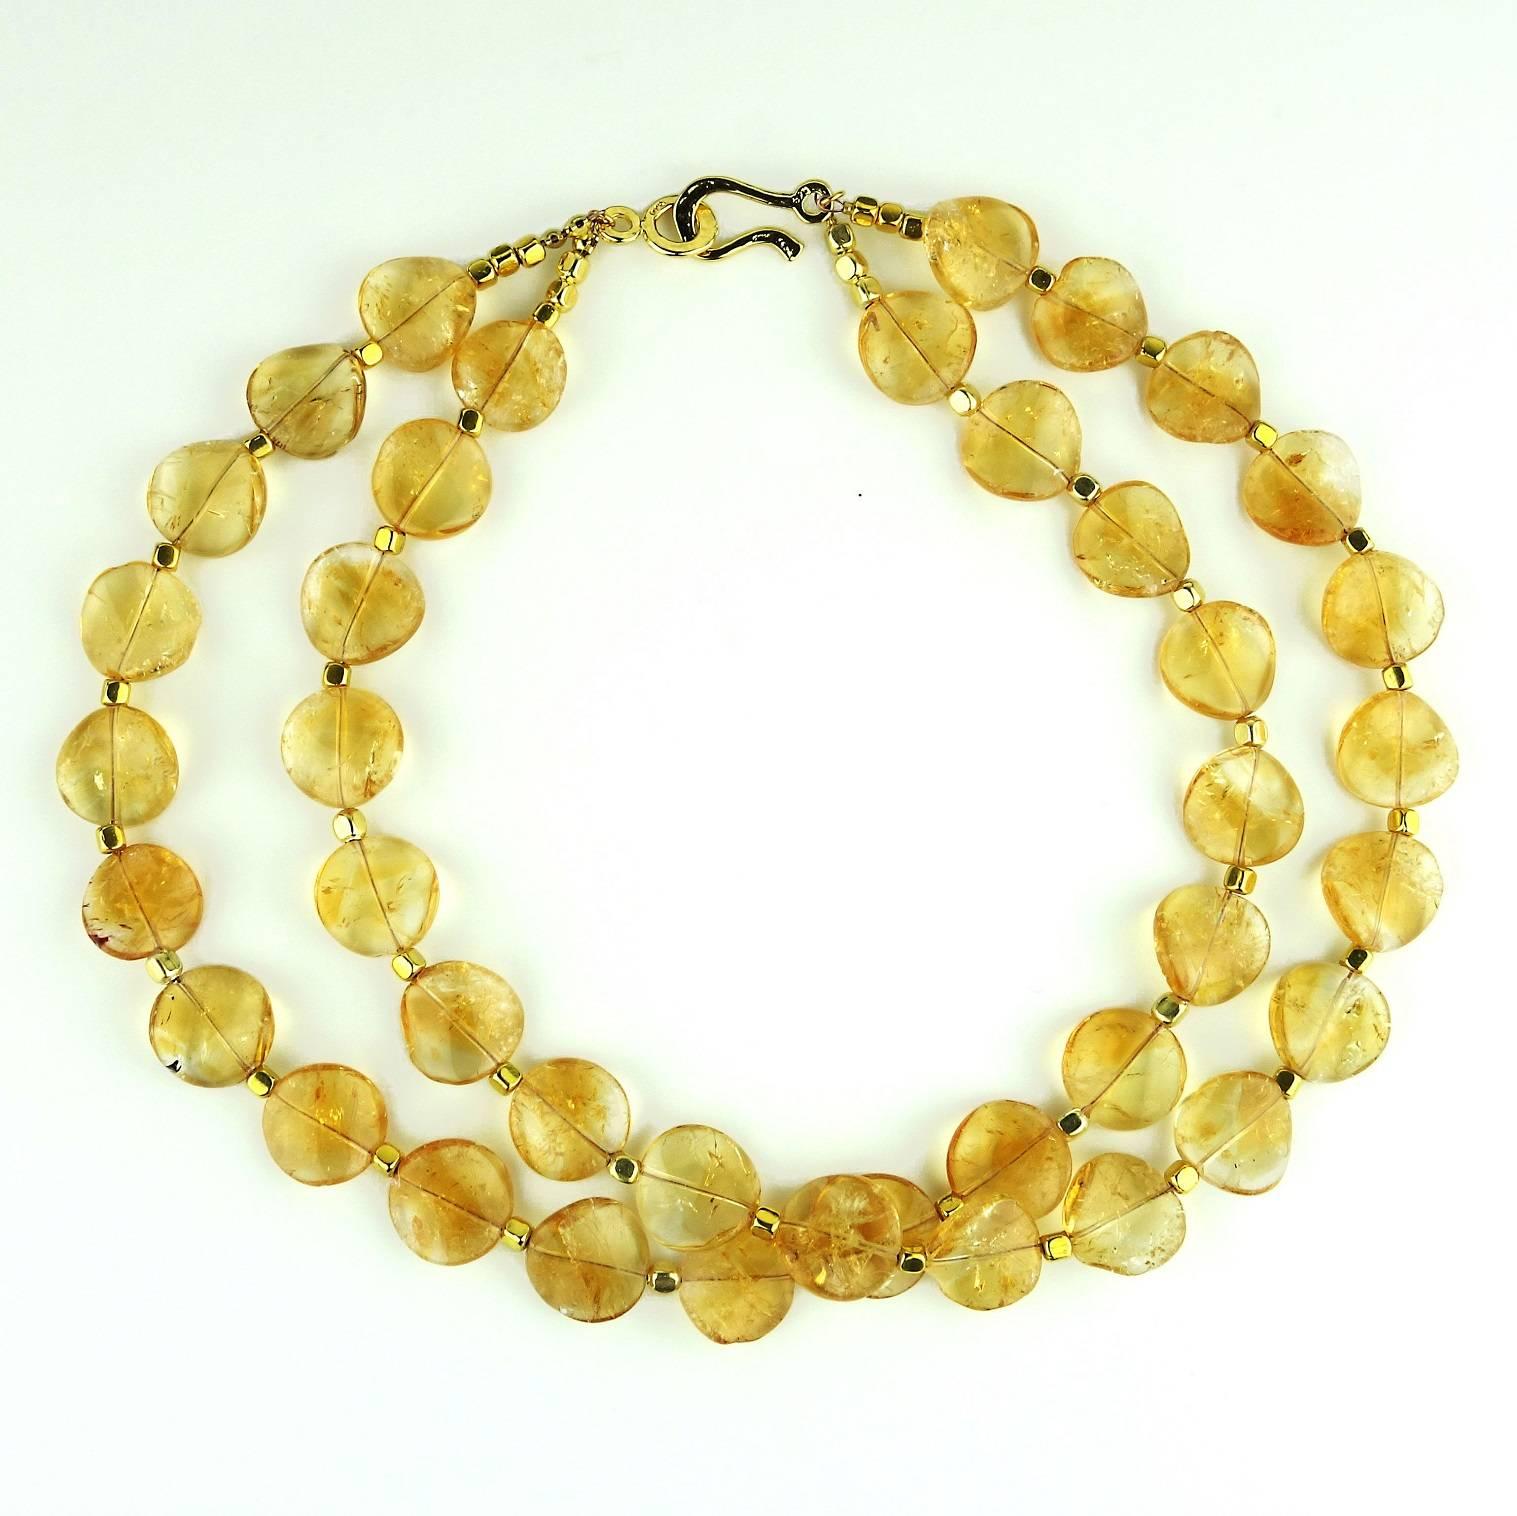 Double strand necklace of 16MM wavy Citrine discs with gold tone accents. This 17.5 inch necklace lays beautifully on your neck as is or can be gently twisted to create a choker.  It is secured with a vermeil hook and eye. Citrine is the November